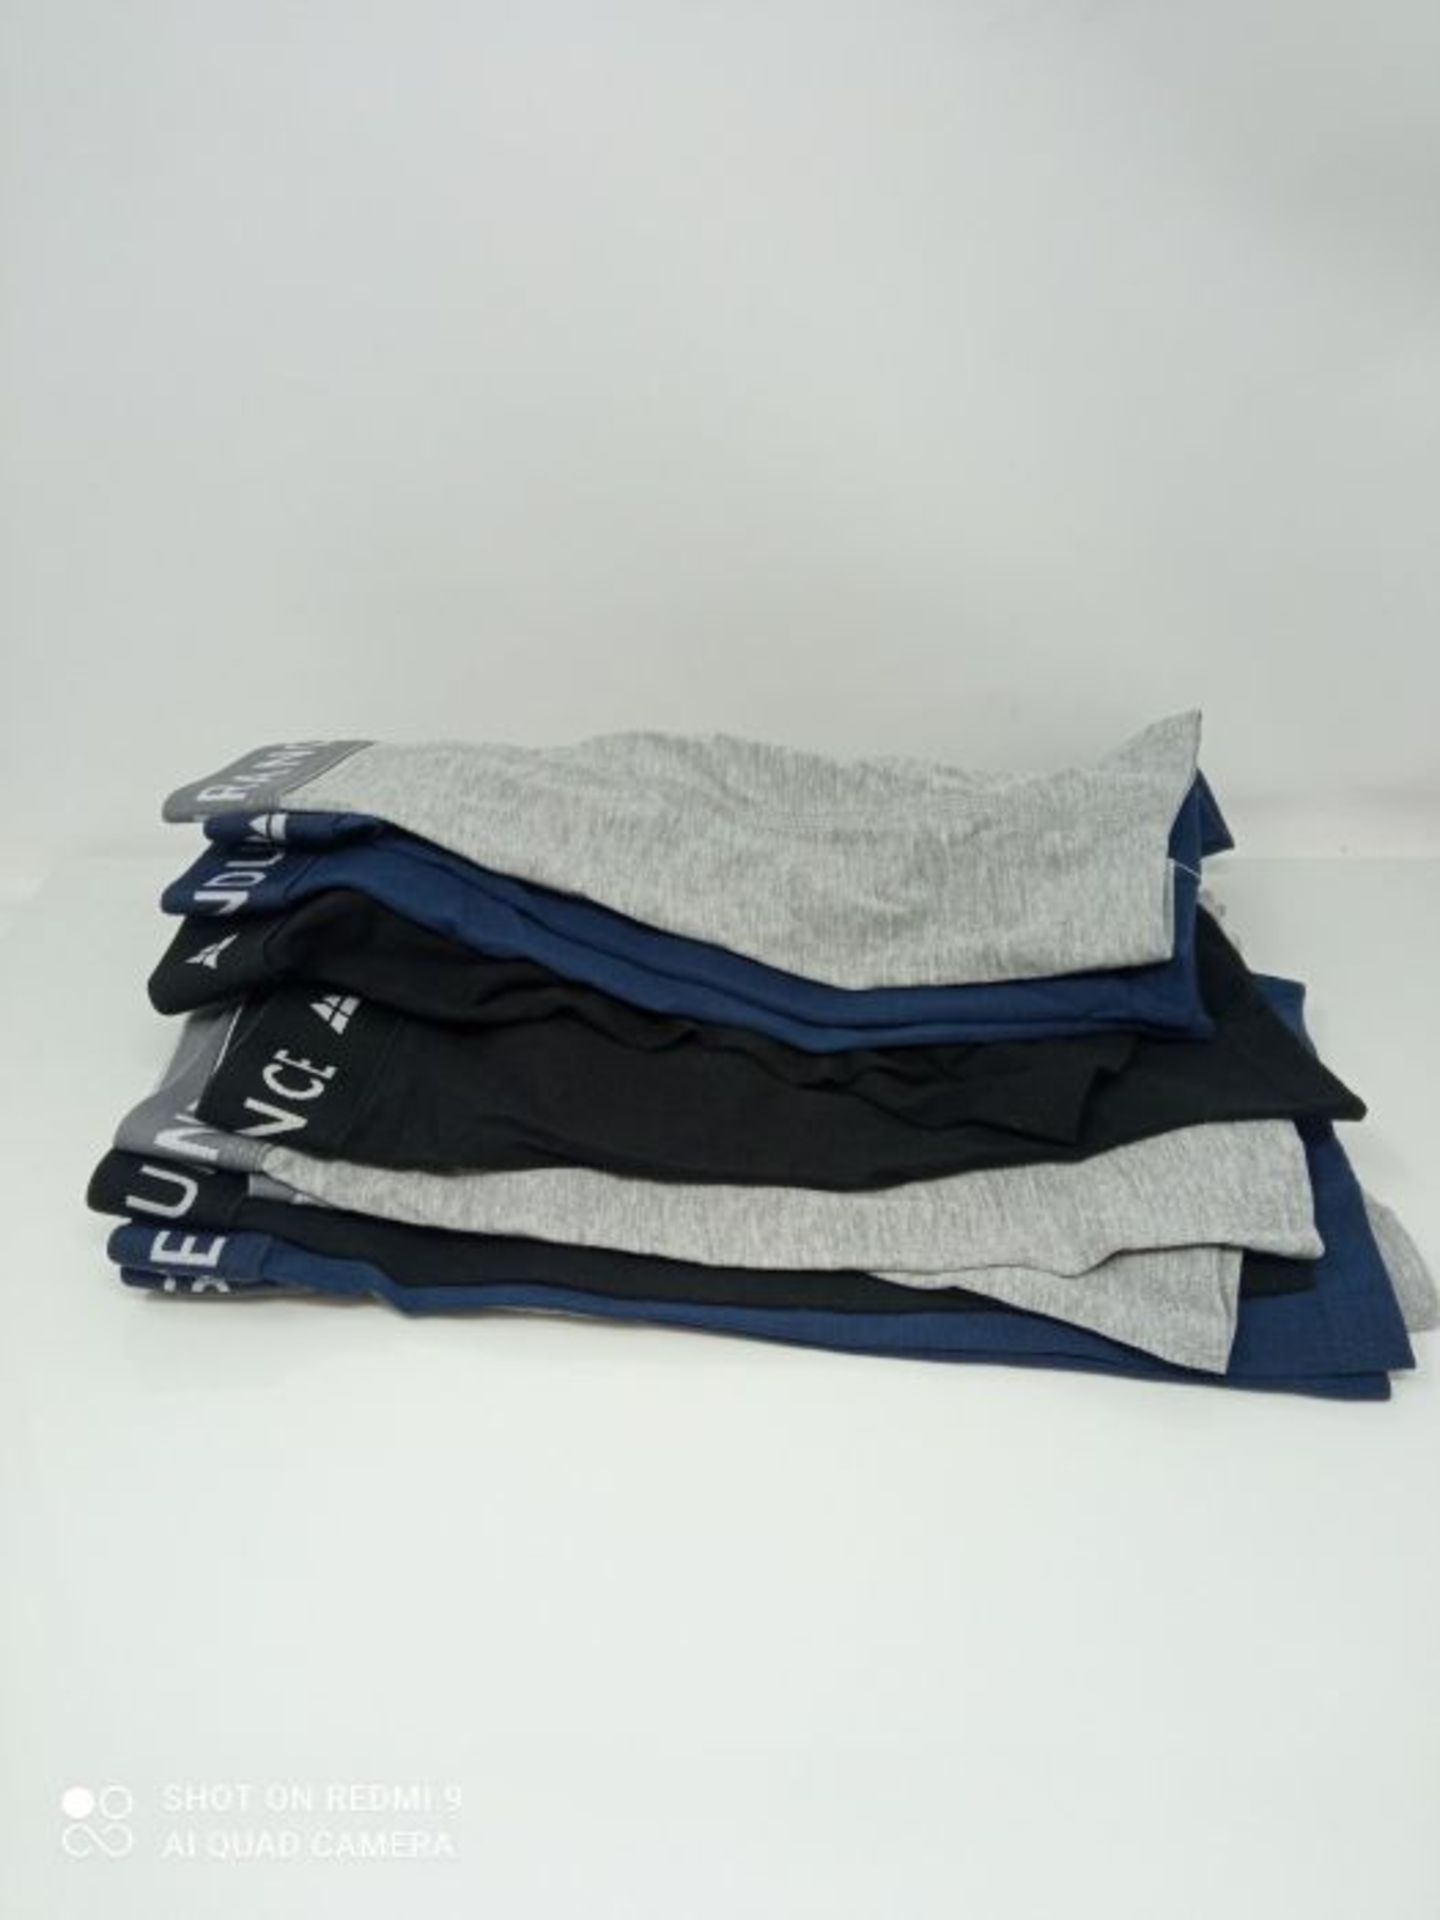 DANISH ENDURANCE Men's Cotton Trunks 6 Pack, Stretchy Soft, Classic Fit Underwear, Box - Image 3 of 3